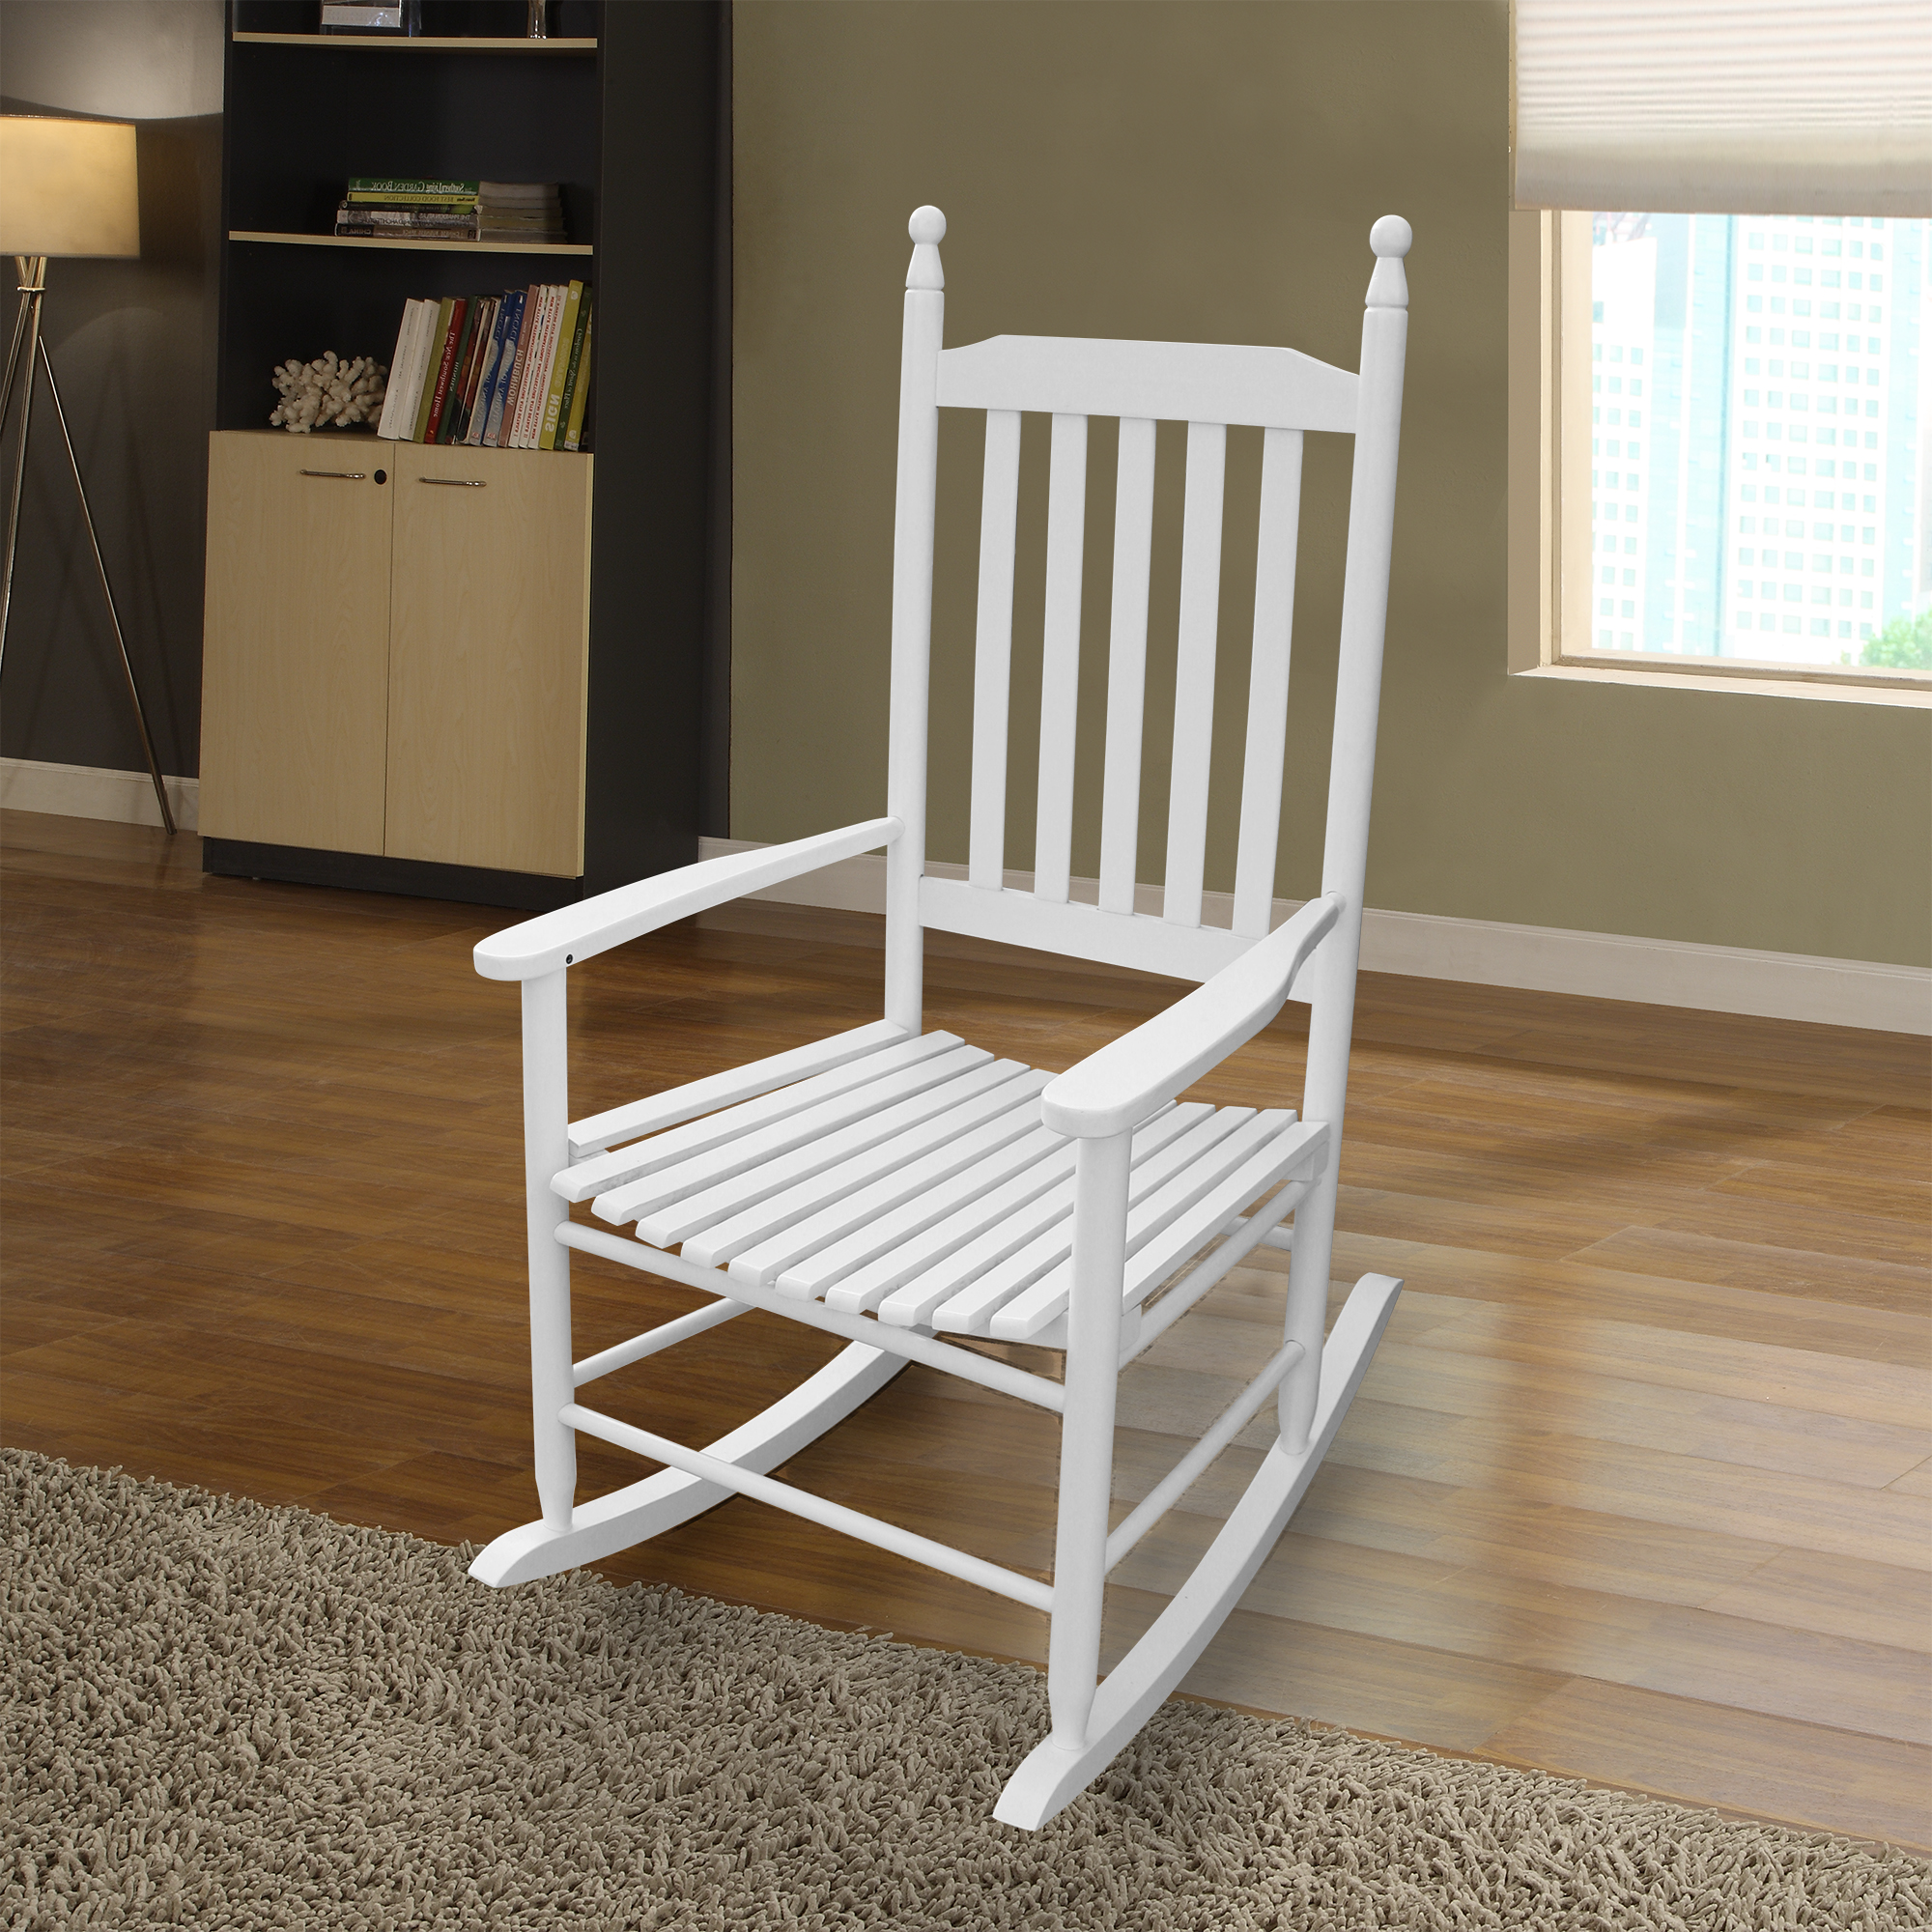 Rocking Chair for Outdoor, Wooden Patio Porch Rocker Chair with Back Support, Ergonomic Wooden Rocking Chair for Patio Porch Backyard, Rocking Bistro Chair Patio Chairs, Max 280lbs, White, A1582 - image 2 of 7